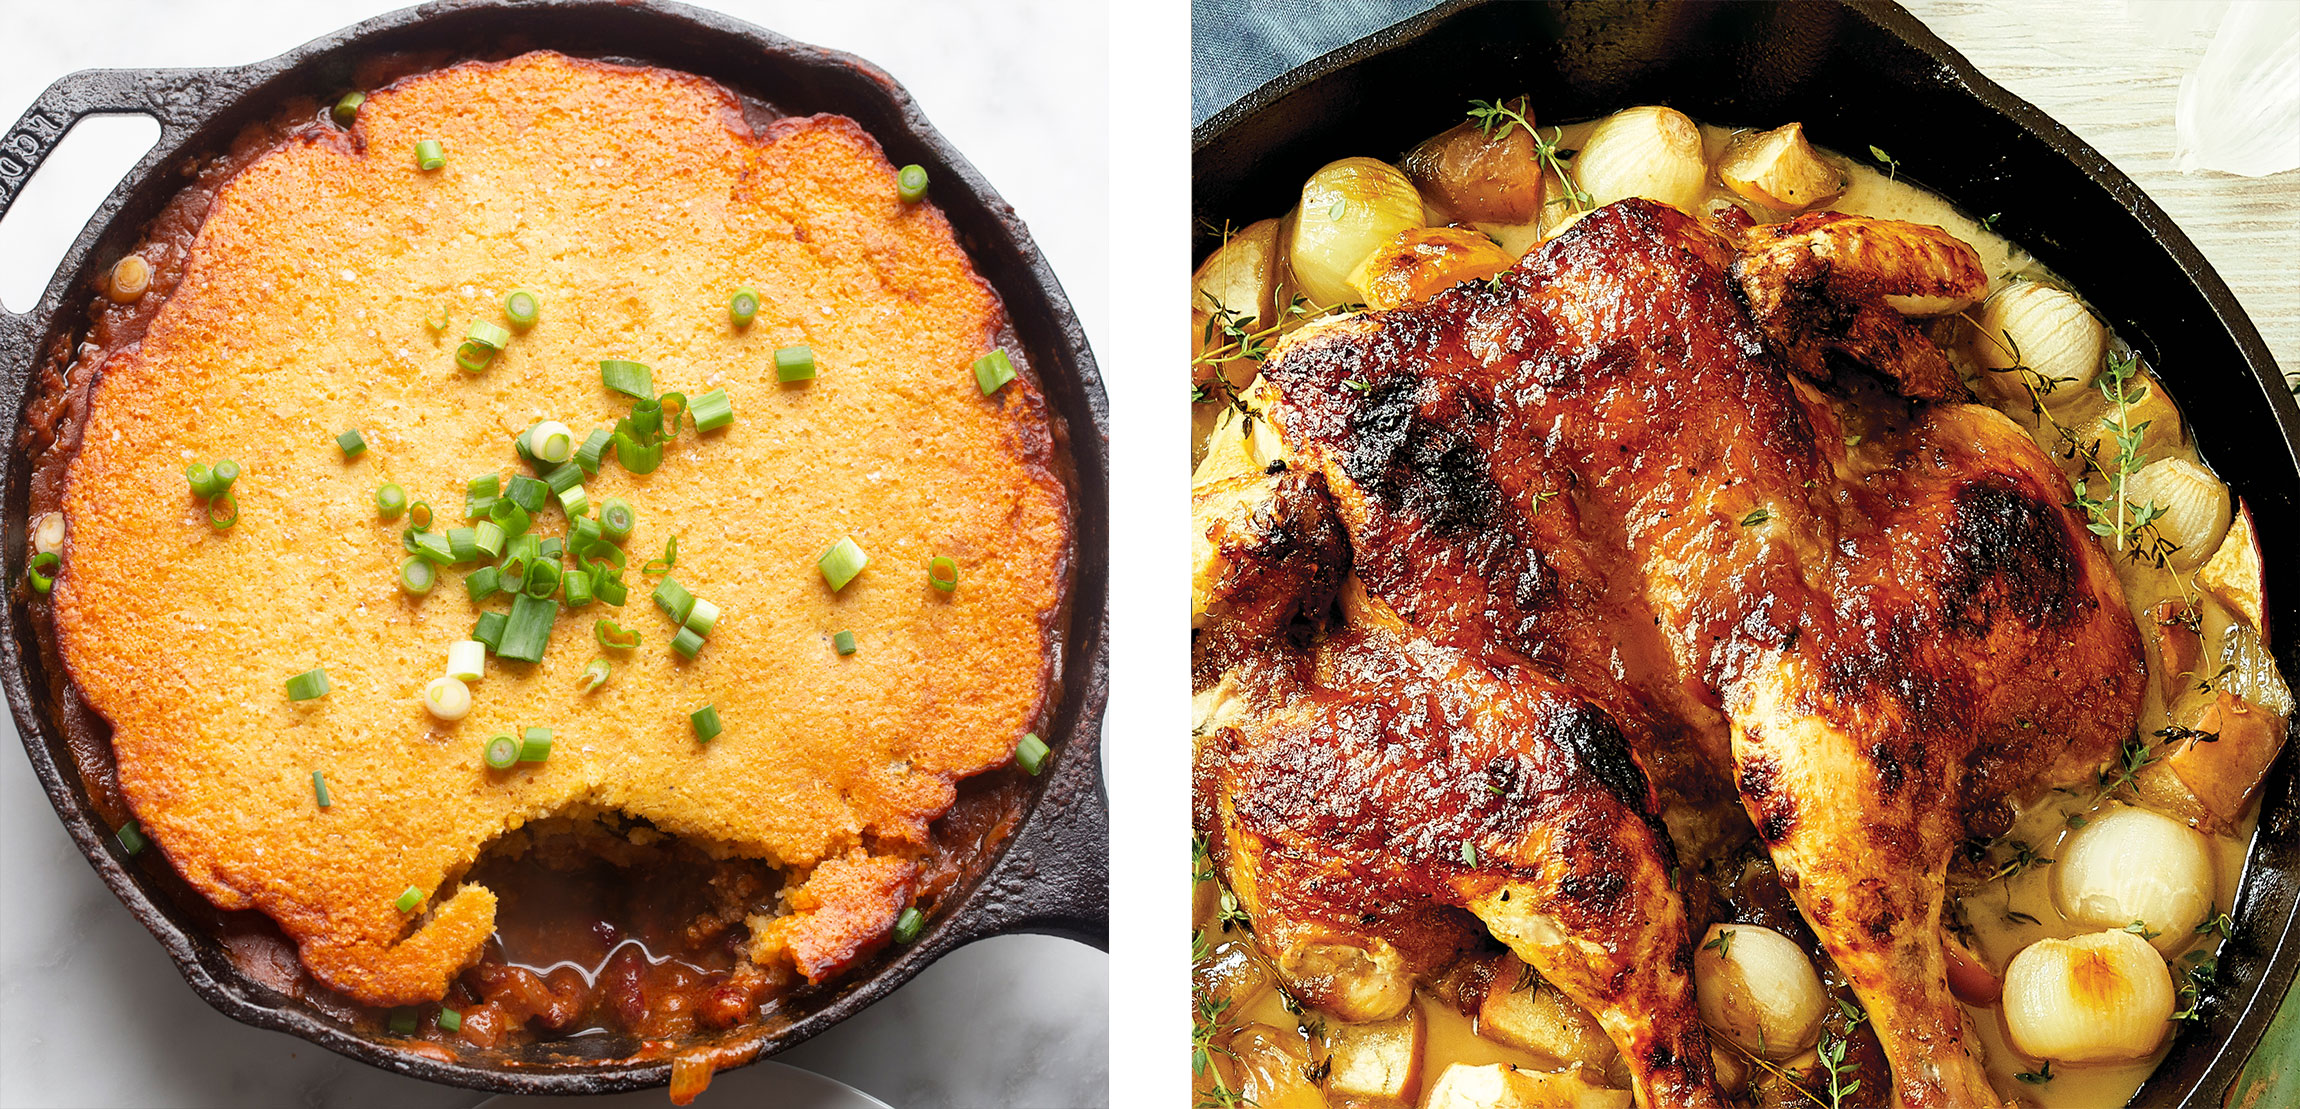 image of our Mesquite Chili Cornbread Bake next to our Roasted Apple and Onion Spatchcock Chicken dish and bother are in cast iron skillets